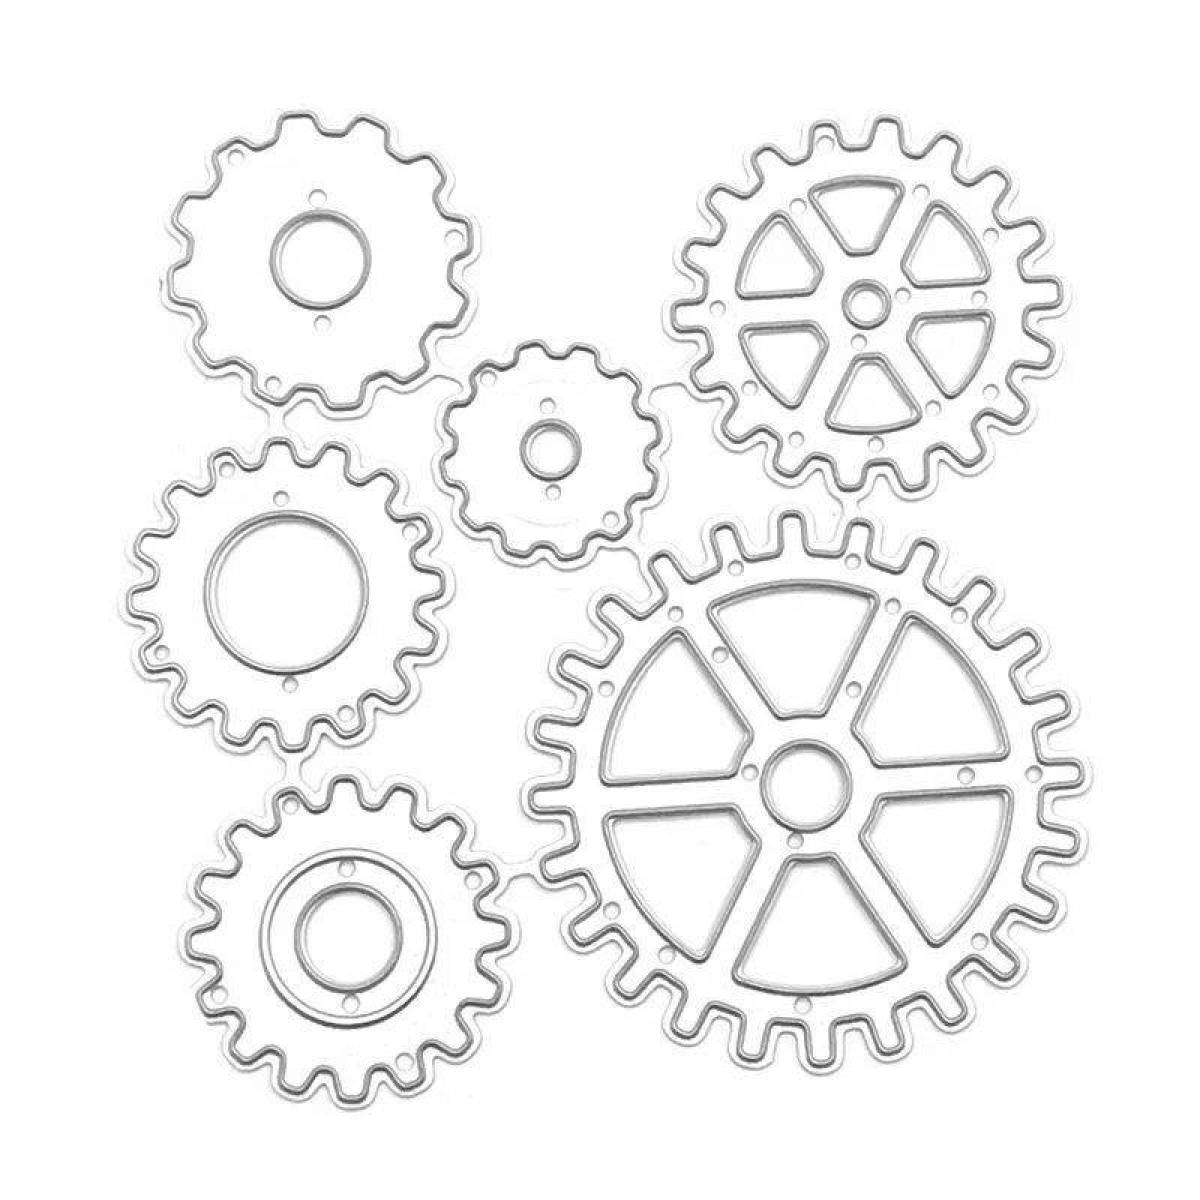 Complex coloring gears